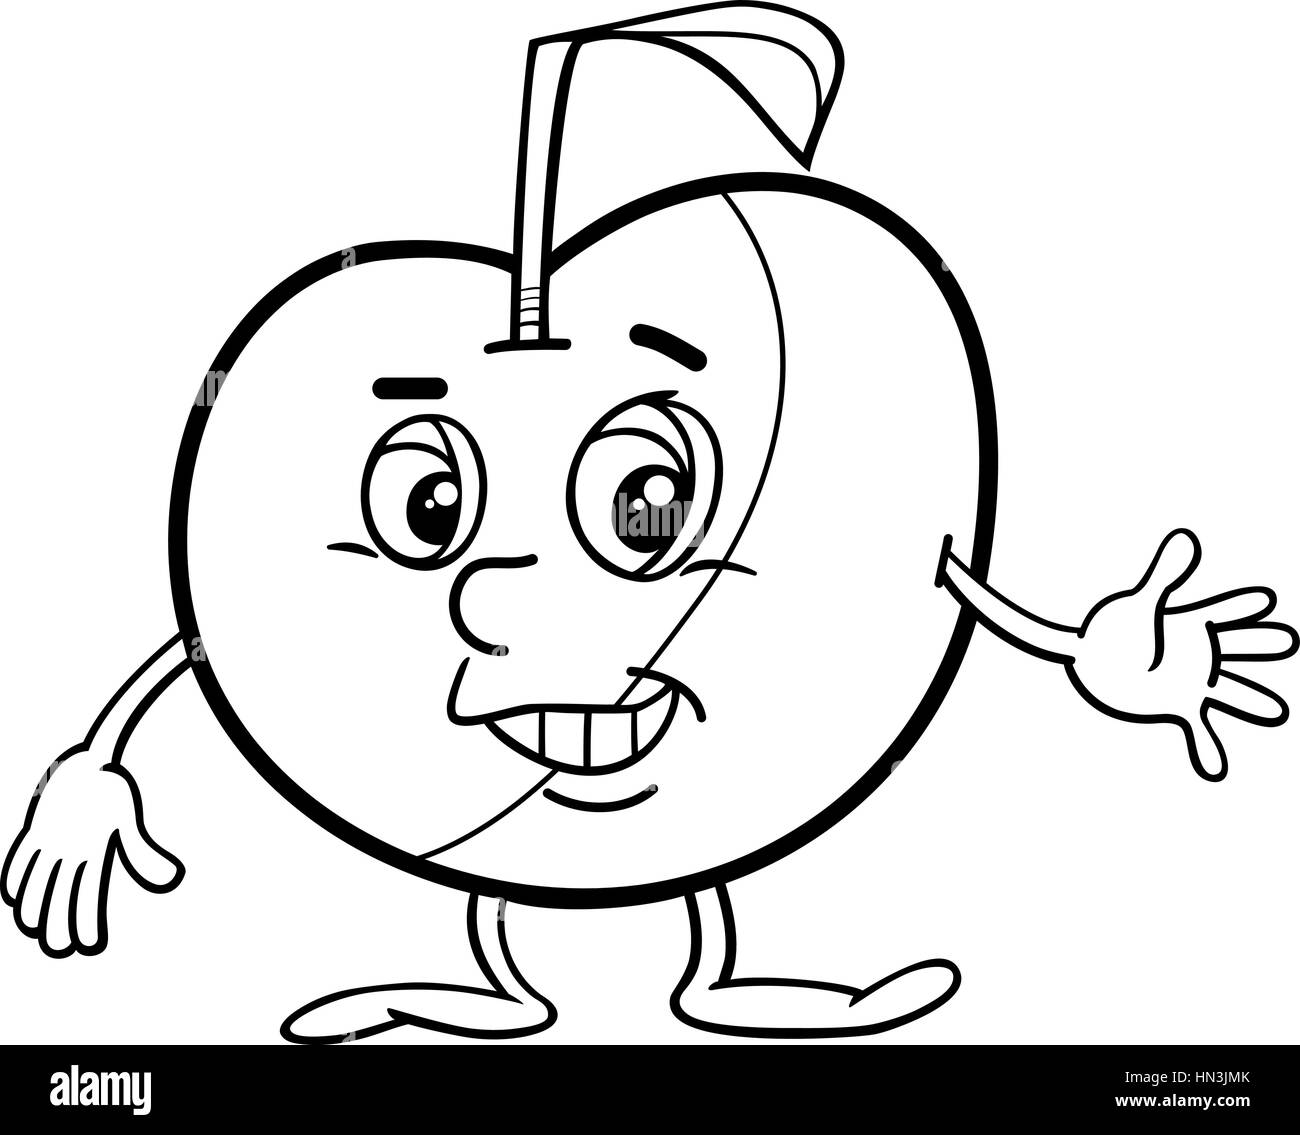 Black and White Cartoon Illustration of Apple Fruit Food Object Character Coloring Page Stock Vector